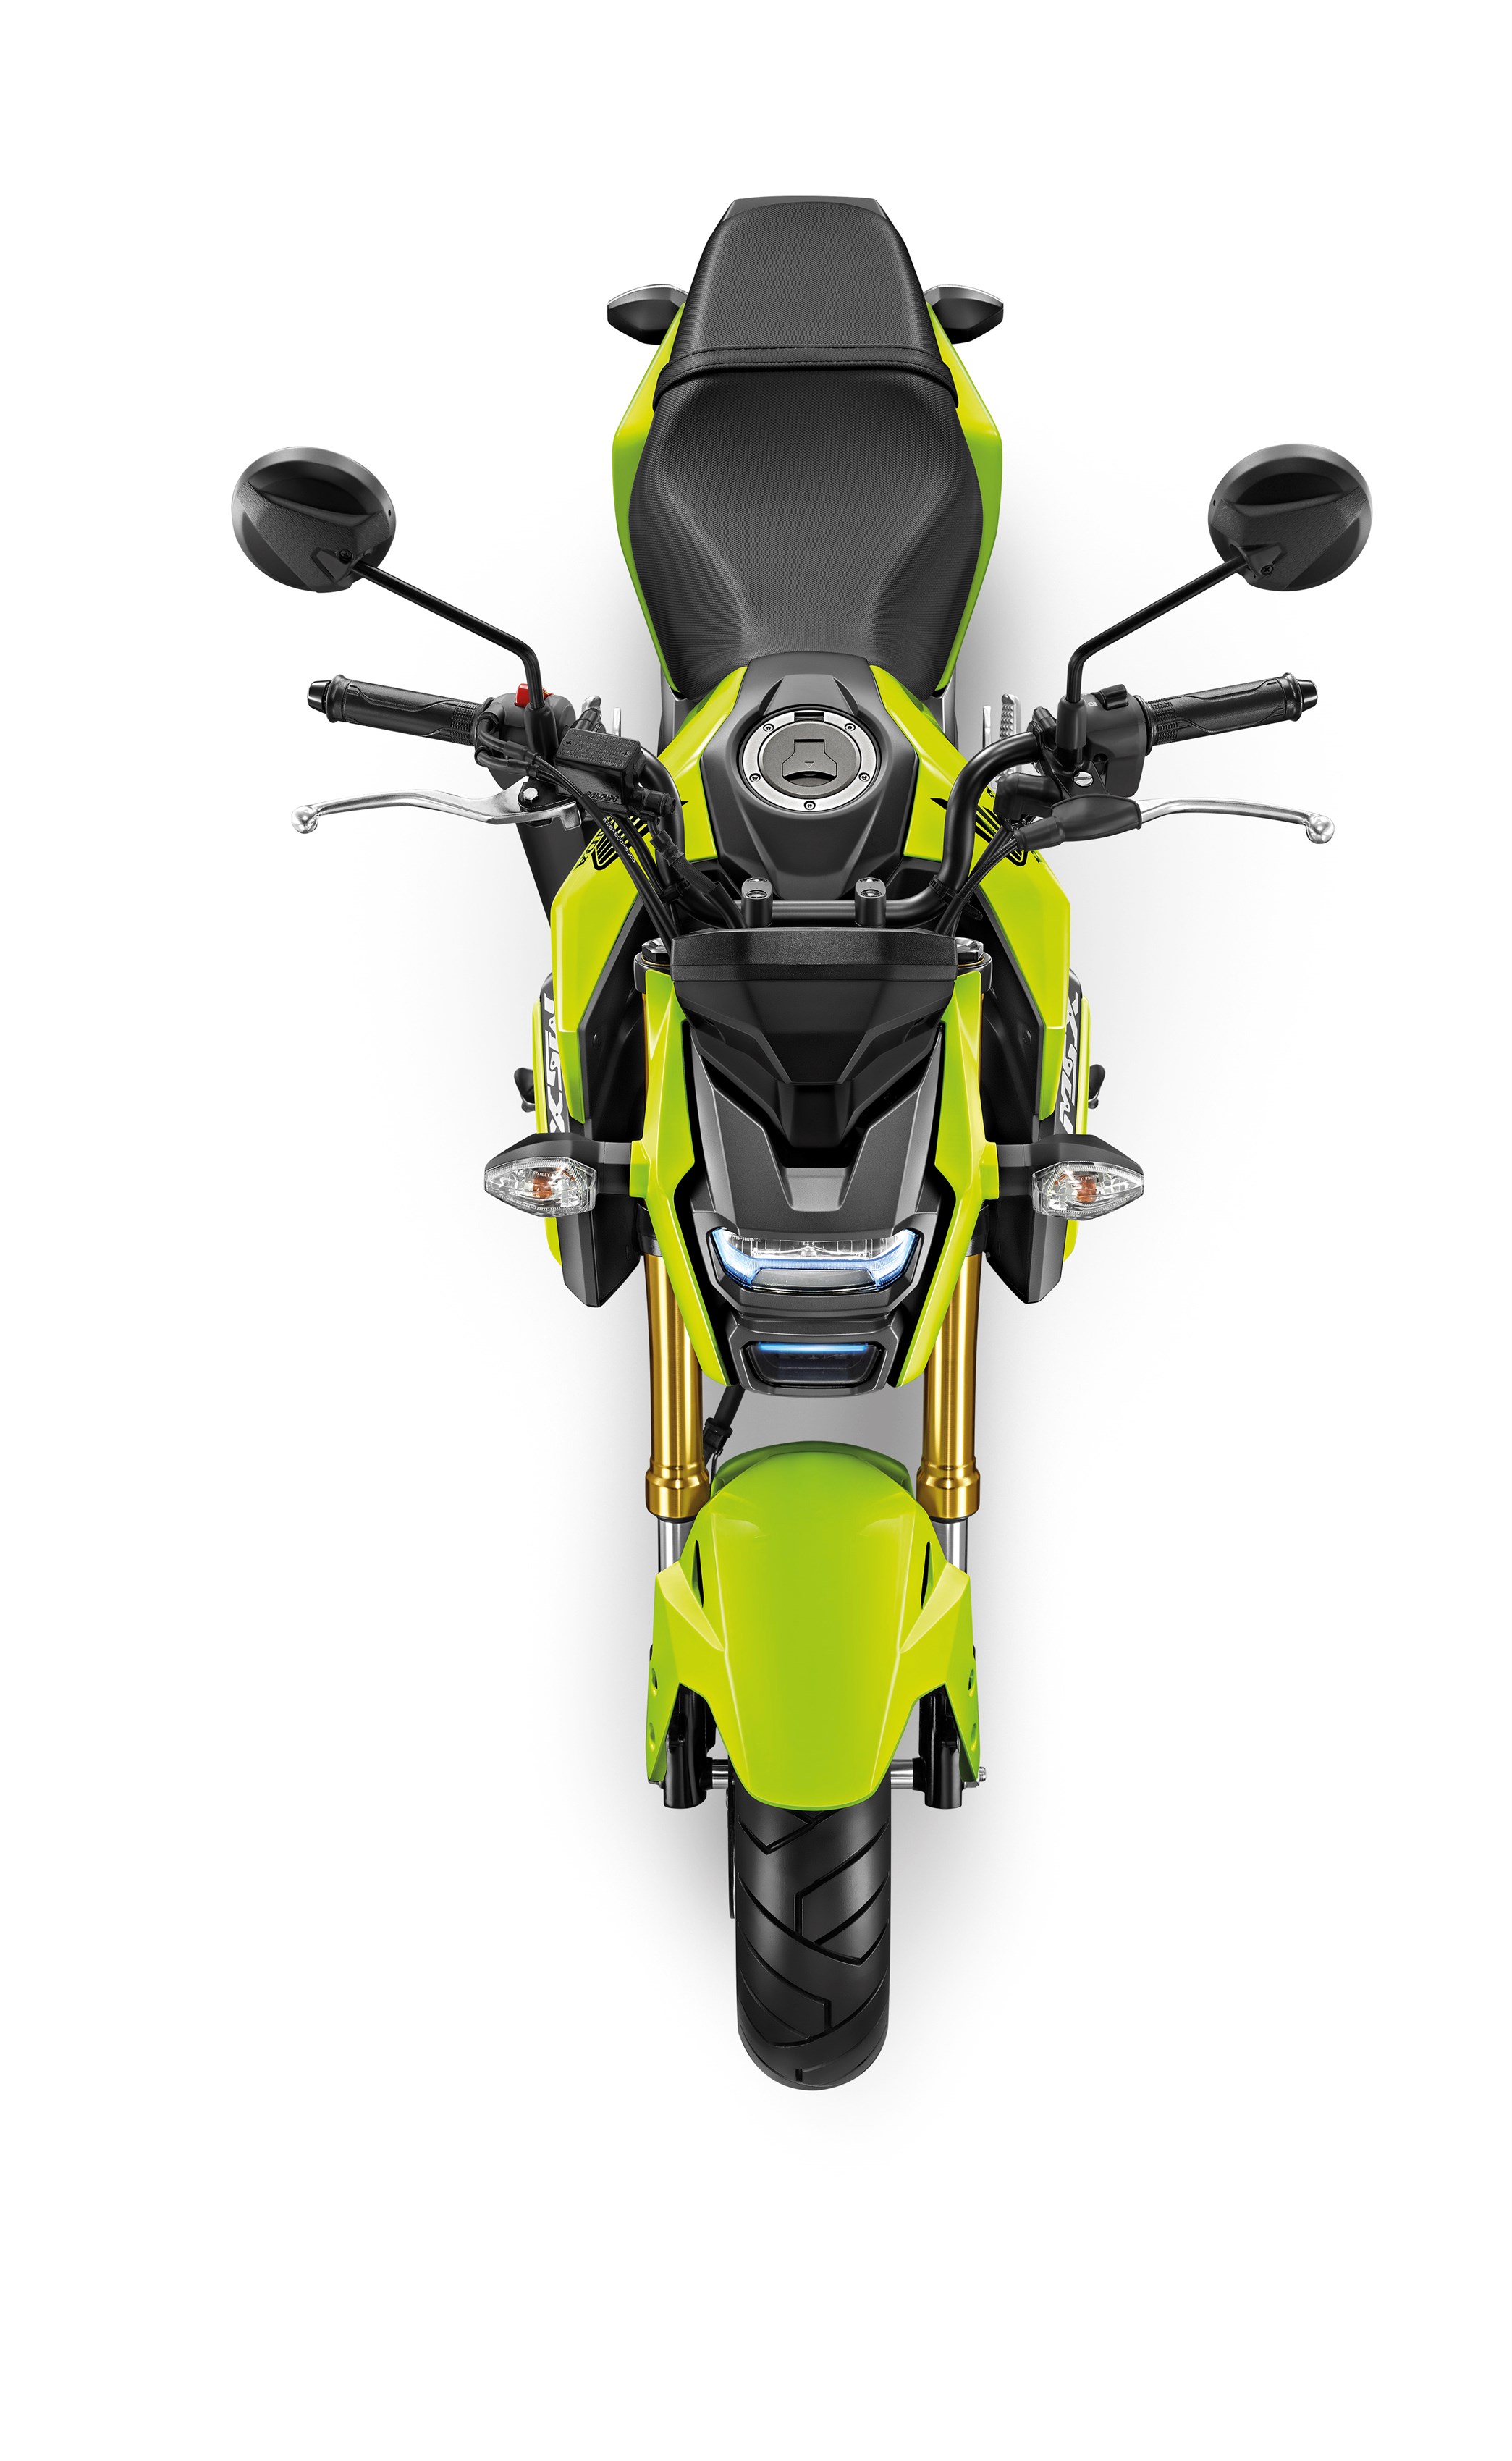 Honda Grom front top angle view